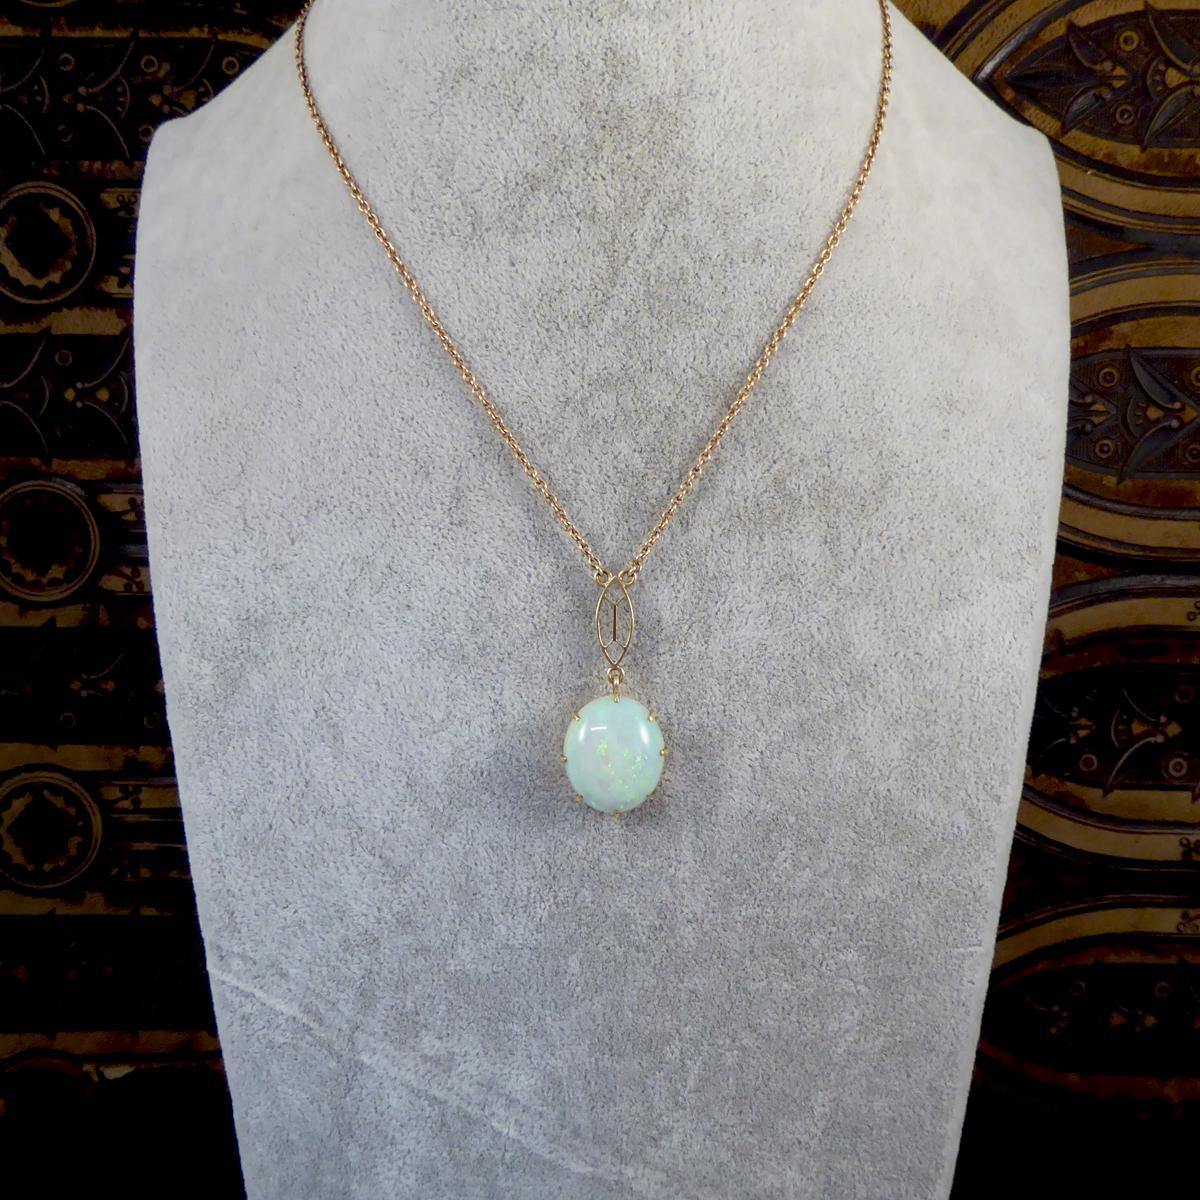 Vintage Single Opal Pendant Necklace on Bail Linked 9 Carat Yellow Gold Chain 2